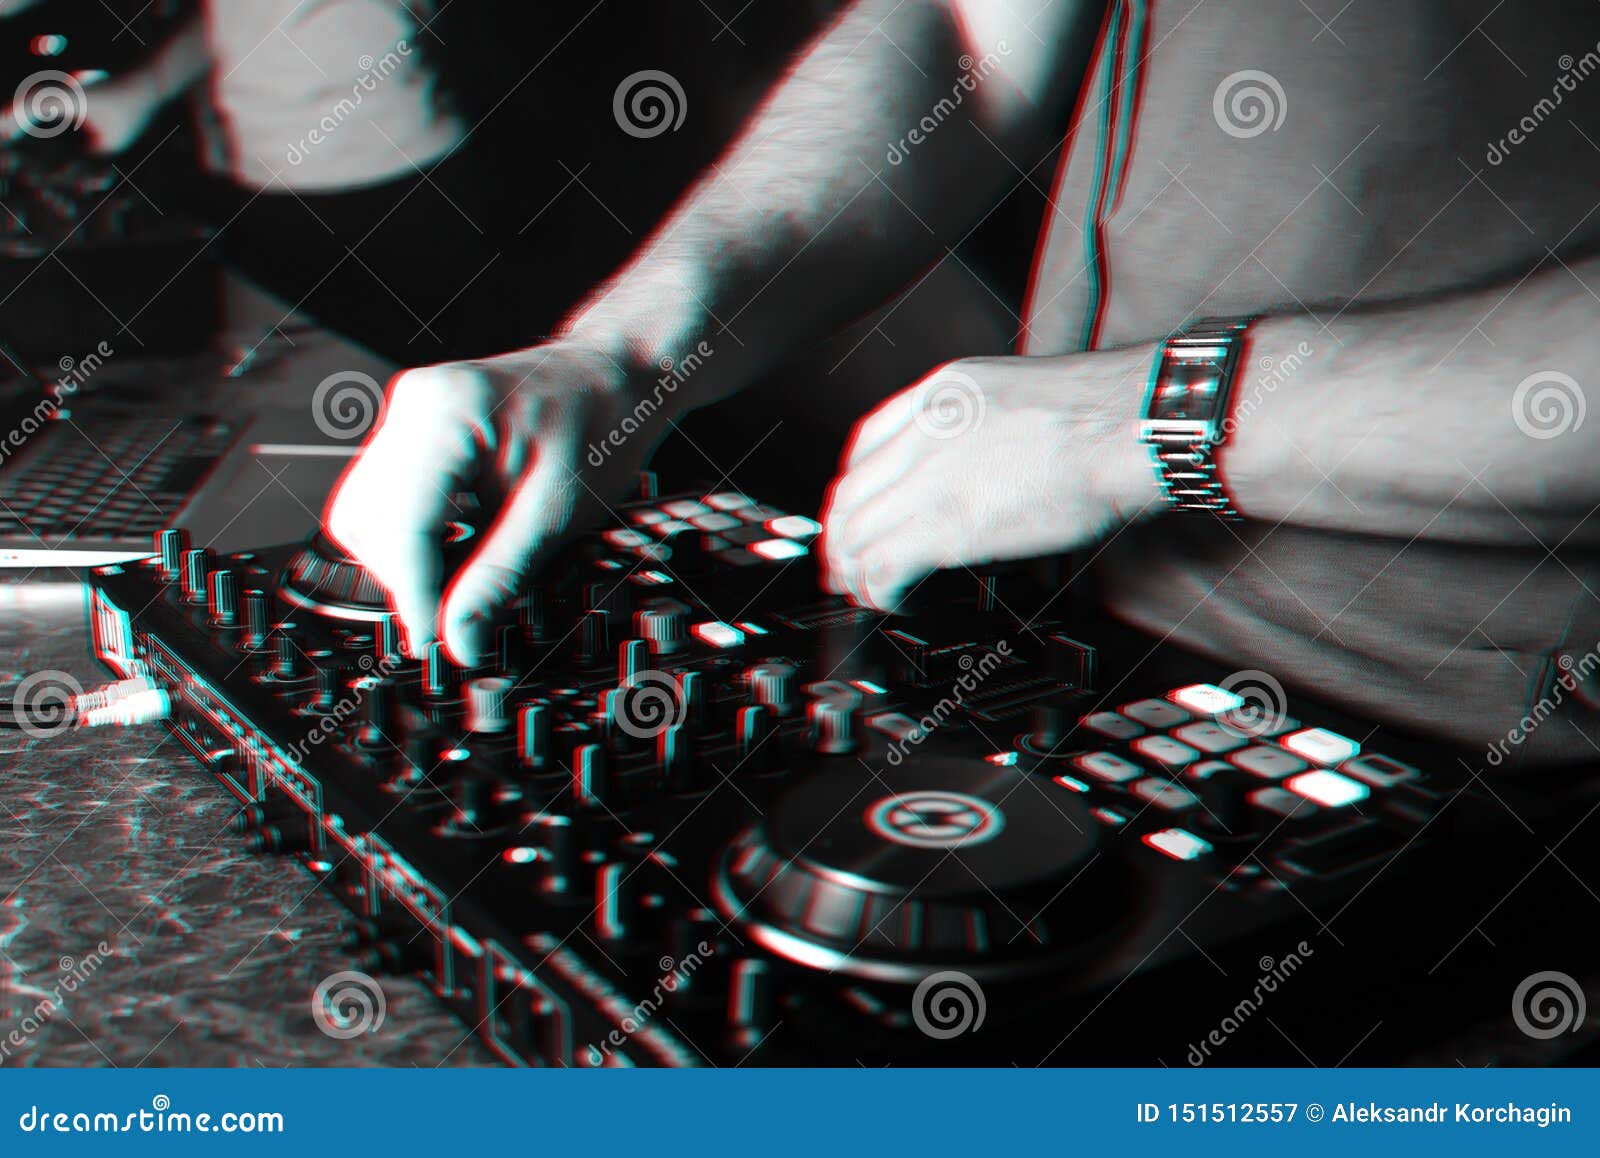 Hands Of A Dj In A Booth Playing On The Mixer Stock Image Image